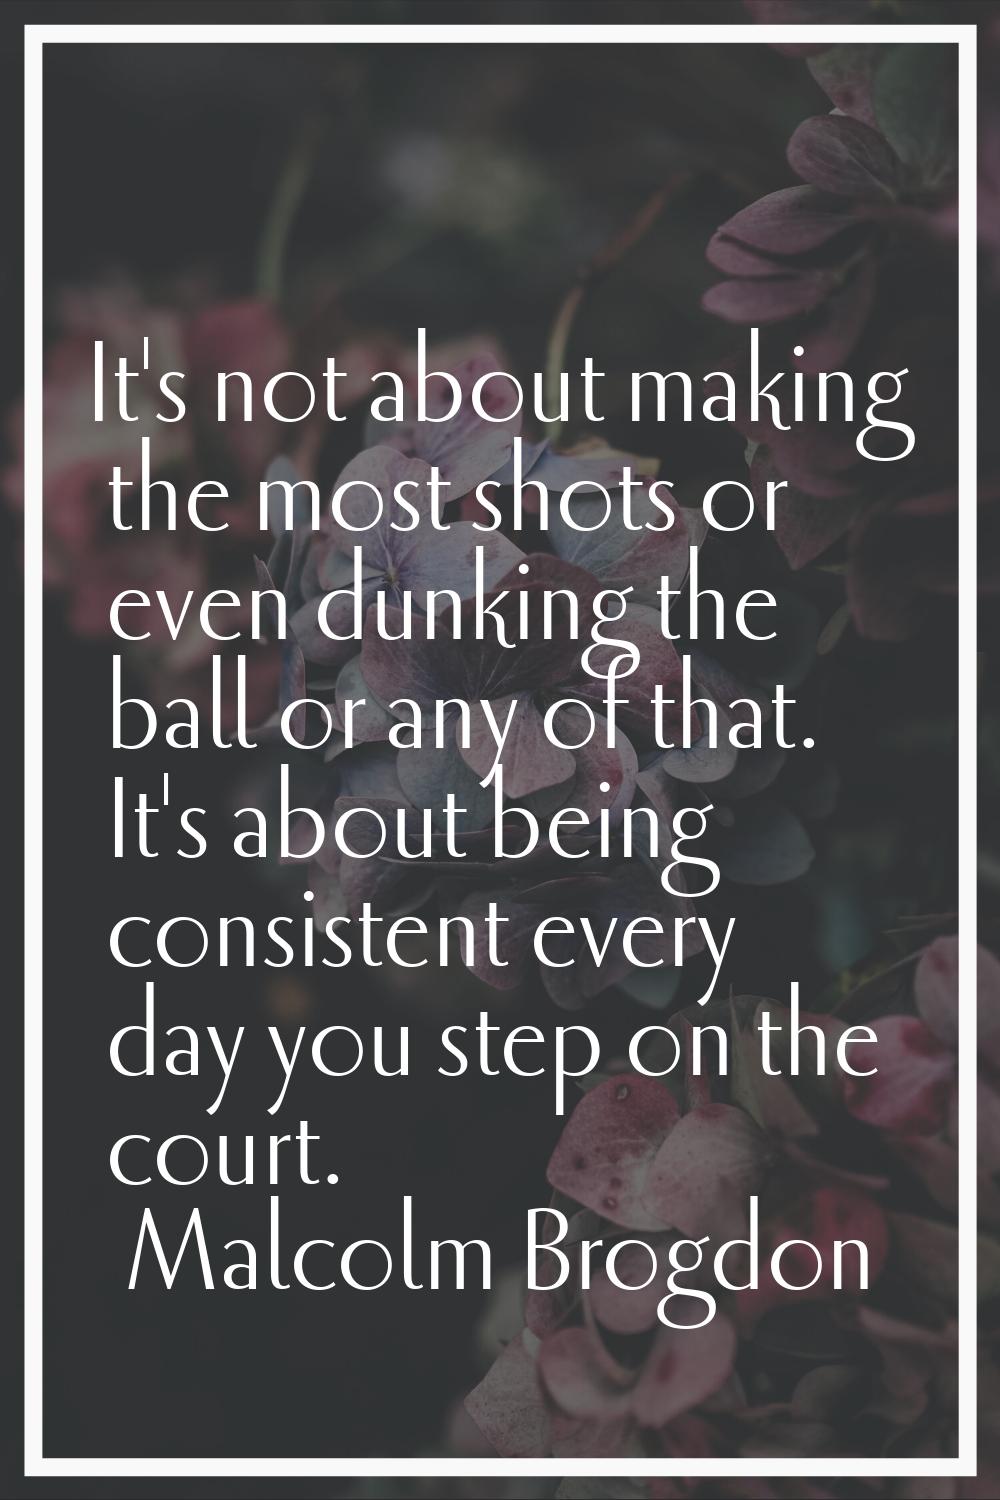 It's not about making the most shots or even dunking the ball or any of that. It's about being cons